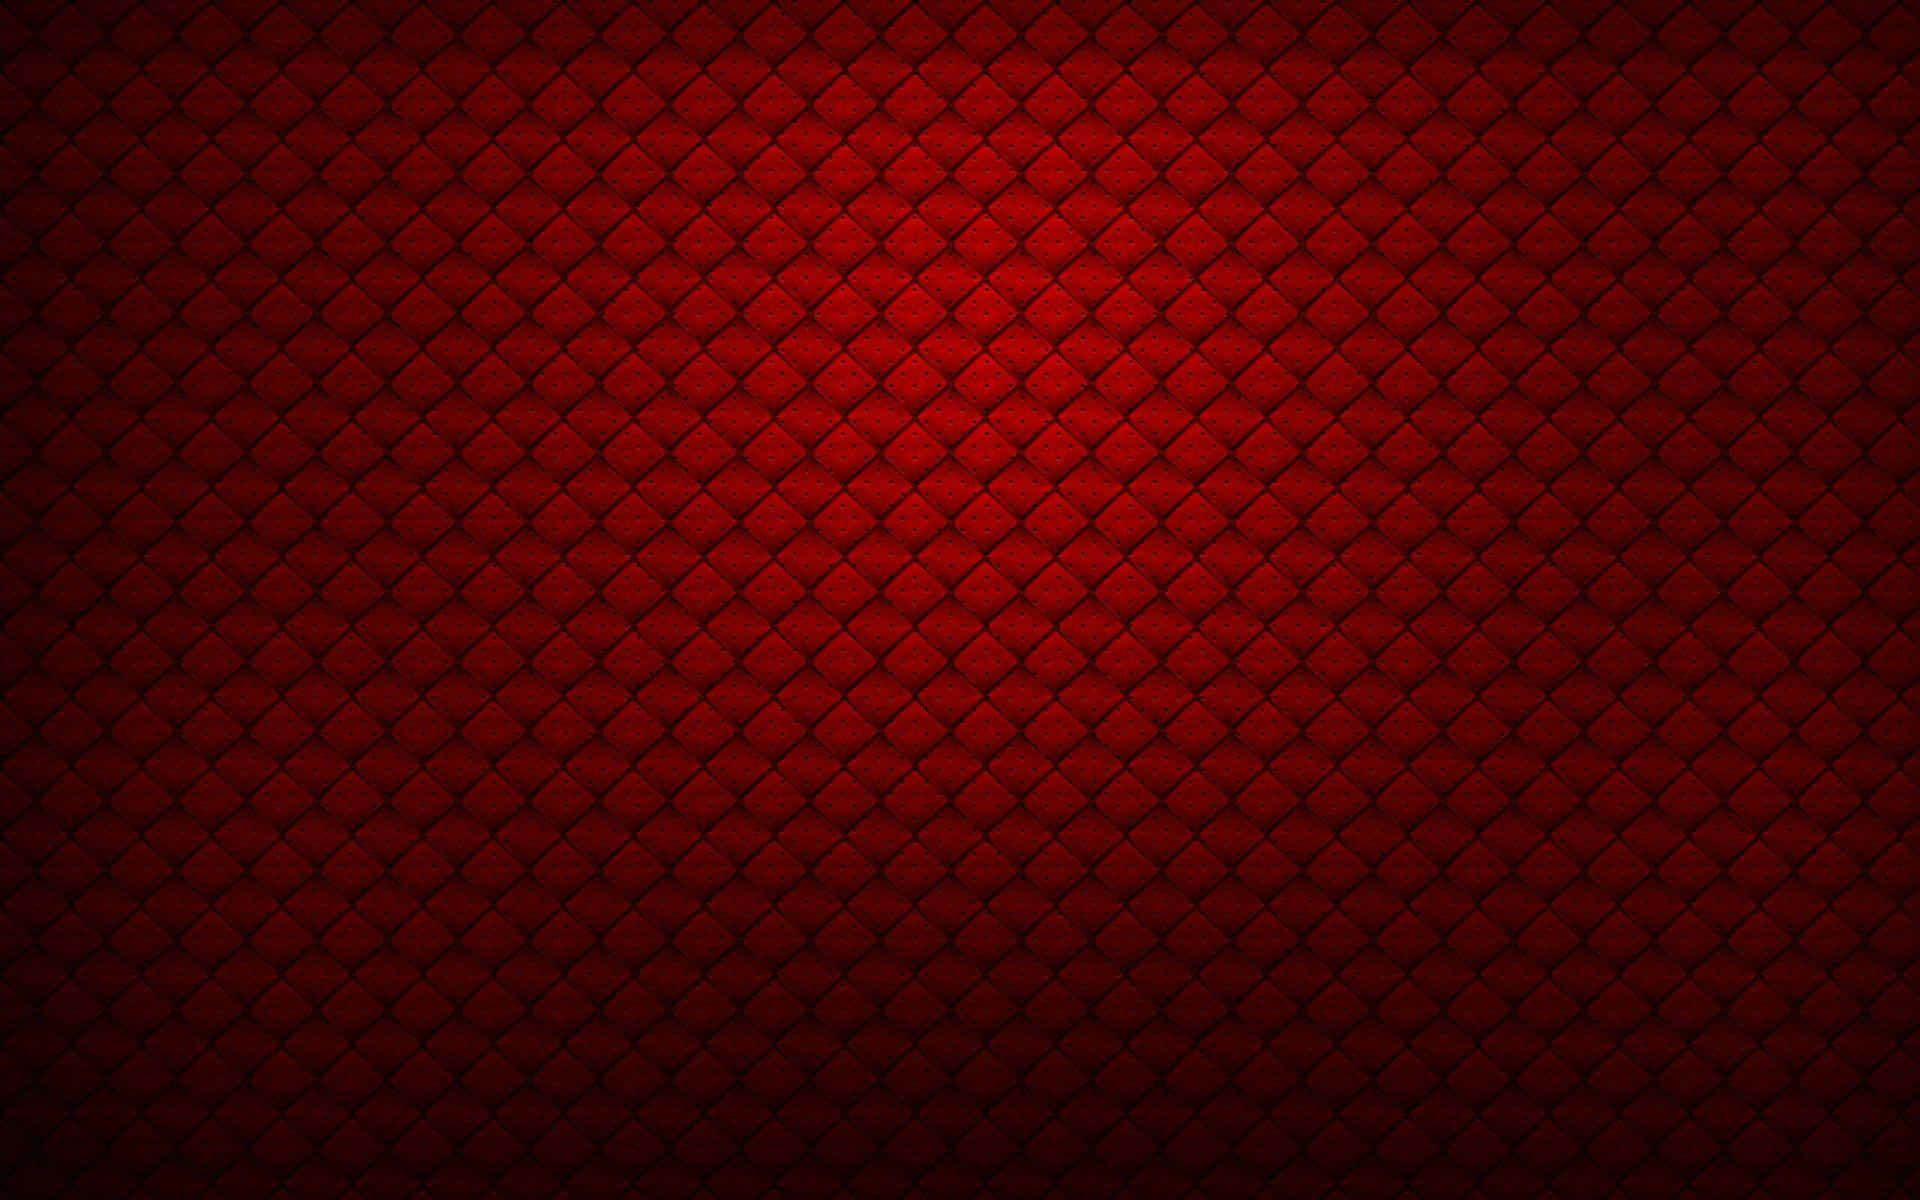 Vibrant Red Background with Crisp High Resolution